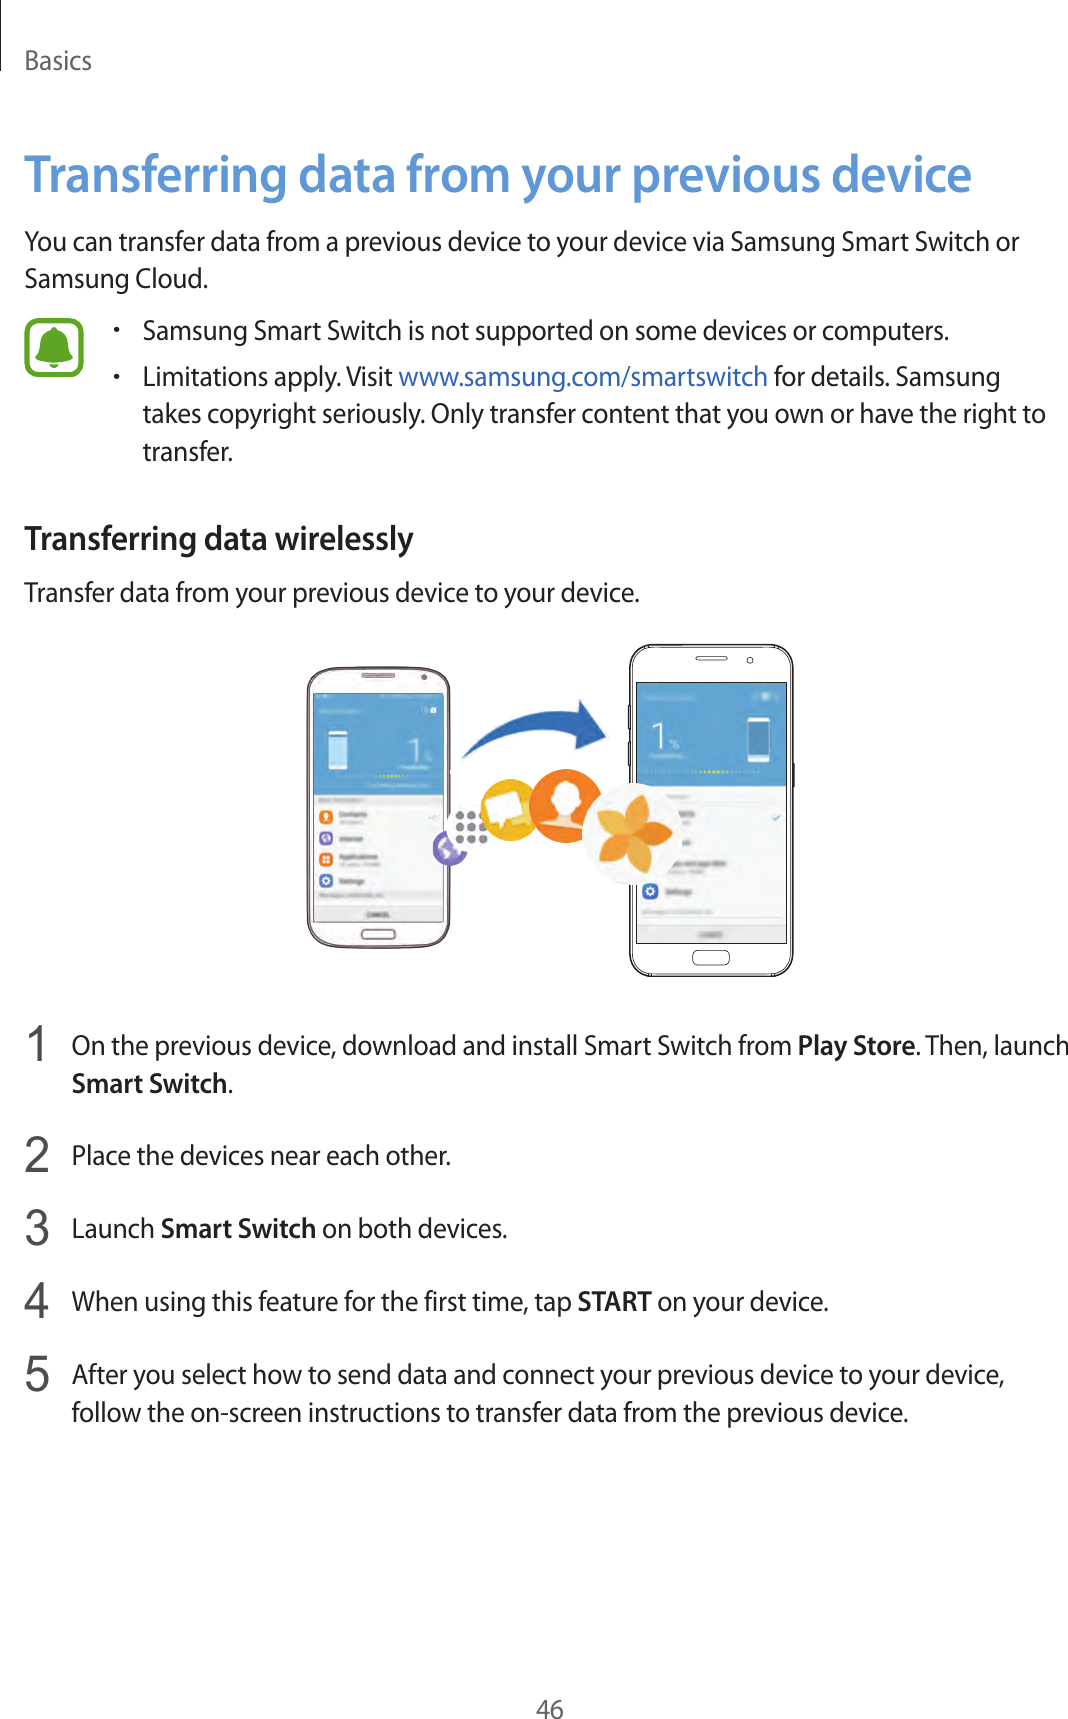 Basics46Transferring data from your previous deviceYou can transfer data from a previous device to your device via Samsung Smart Switch or Samsung Cloud.•Samsung Smart Switch is not supported on some devices or computers.•Limitations apply. Visit www.samsung.com/smartswitch for details. Samsung takes copyright seriously. Only transfer content that you own or have the right to transfer.Transferring data wirelesslyTransfer data from your previous device to your device.1  On the previous device, download and install Smart Switch from Play Store. Then, launch Smart Switch.2  Place the devices near each other.3  Launch Smart Switch on both devices.4  When using this feature for the first time, tap START on your device.5  After you select how to send data and connect your previous device to your device, follow the on-screen instructions to transfer data from the previous device.